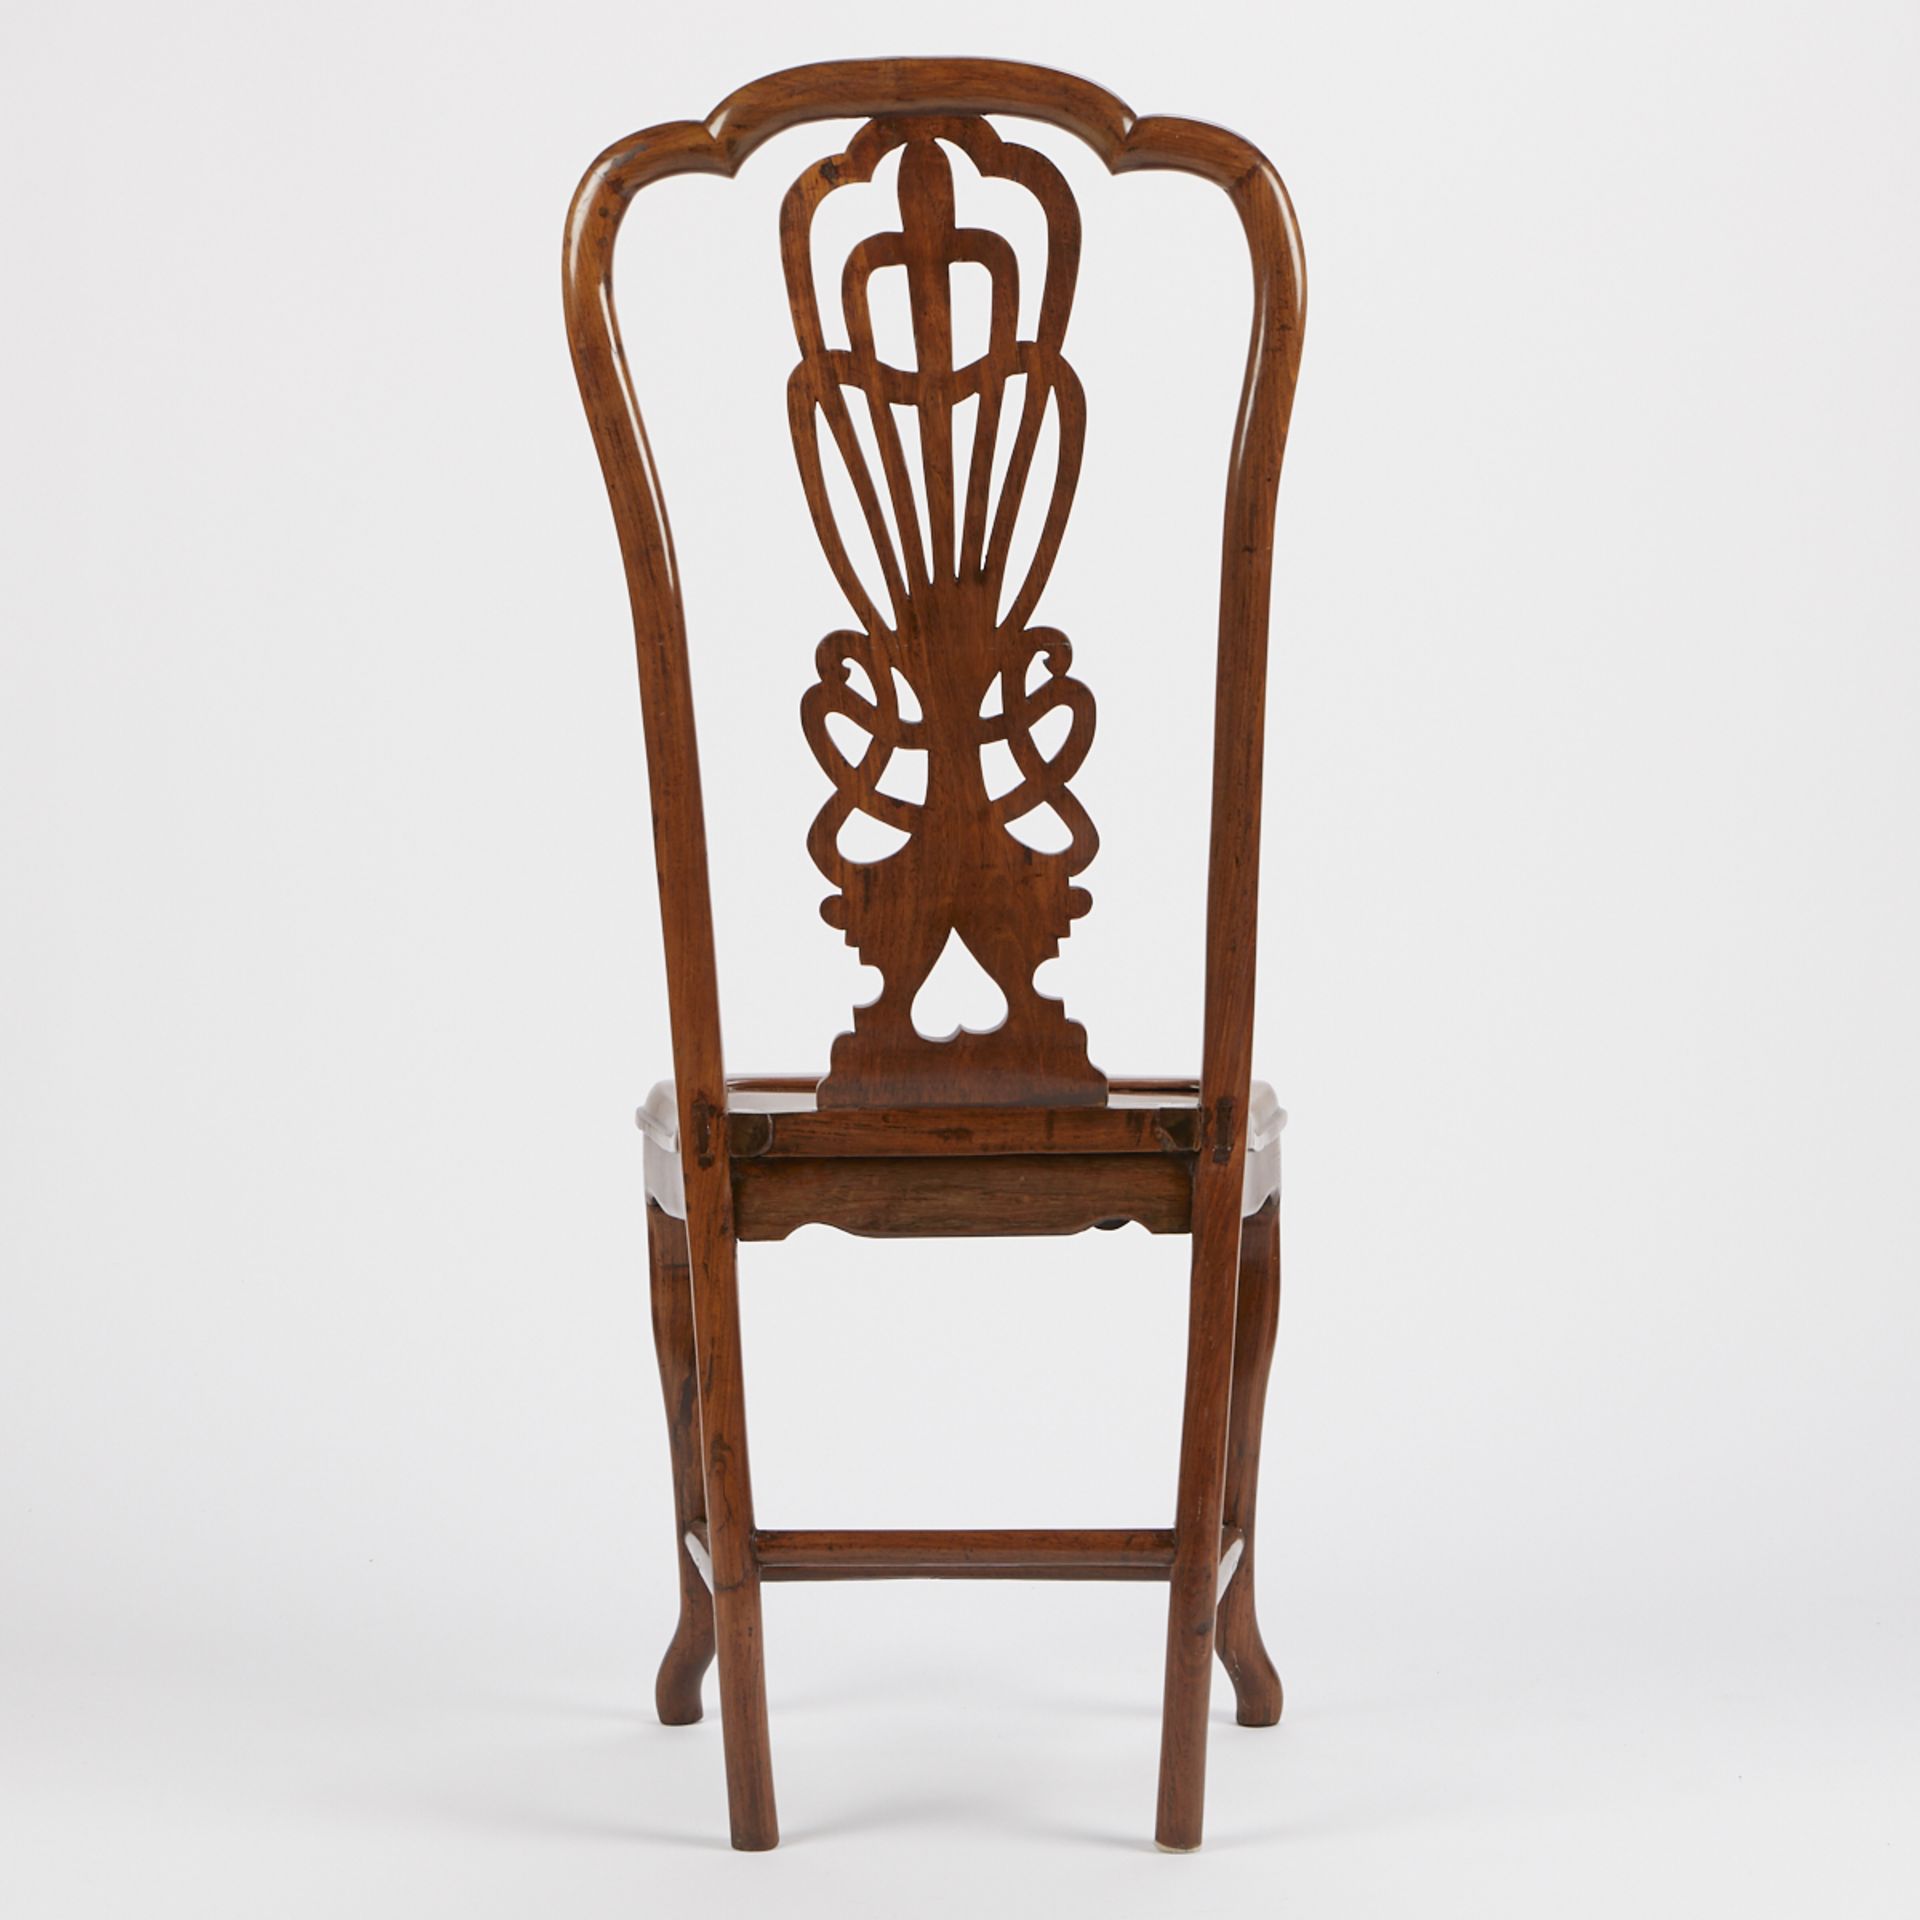 Chinese Export Carved Wooden Chair Art Nouveau - Image 3 of 6